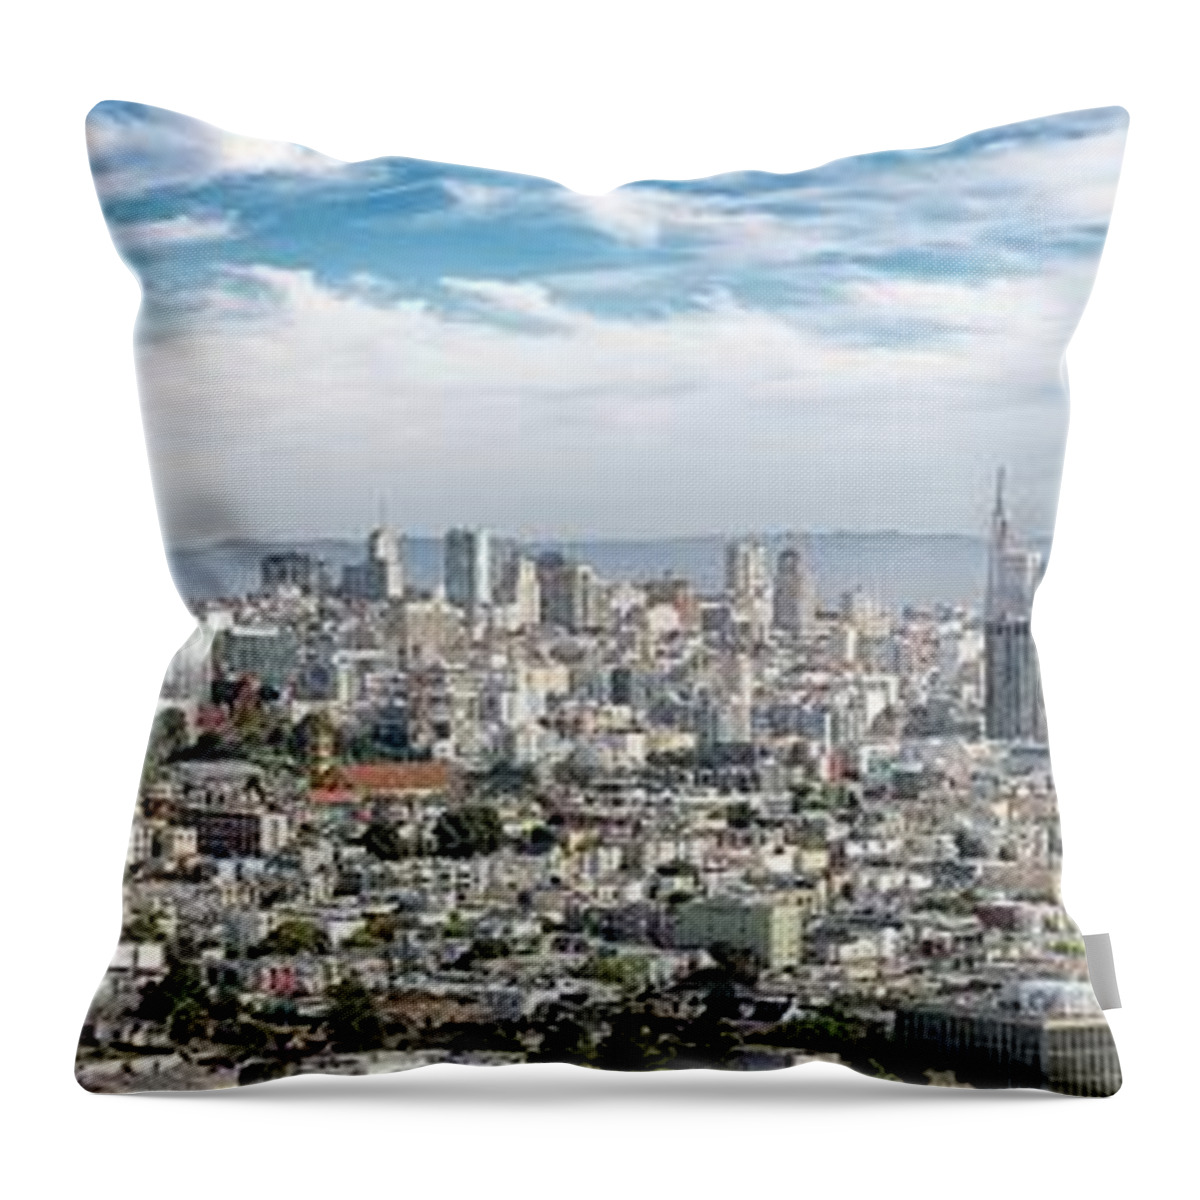 Panorama; Rudy Wilms; Veerle Lievens; California; San Francisco; Corona Heights; Www.rudywilms.com; Www.rudywilms.photography Throw Pillow featuring the photograph San Francisco Panorama, Corona Heights by Rudy Wilms